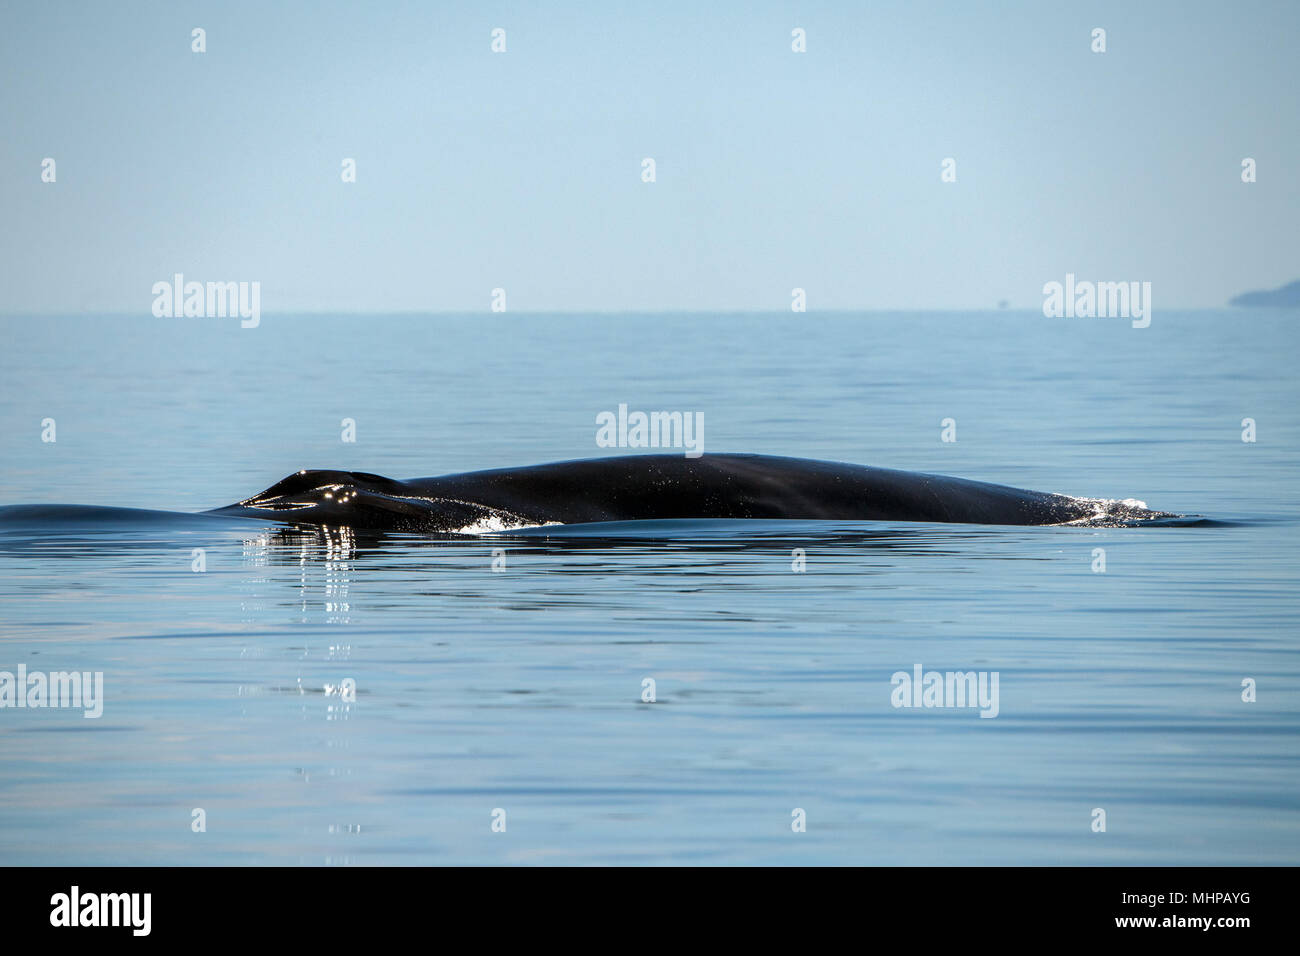 Blue Whale the biggest animal in the world 24 meters long Stock Photo -  Alamy